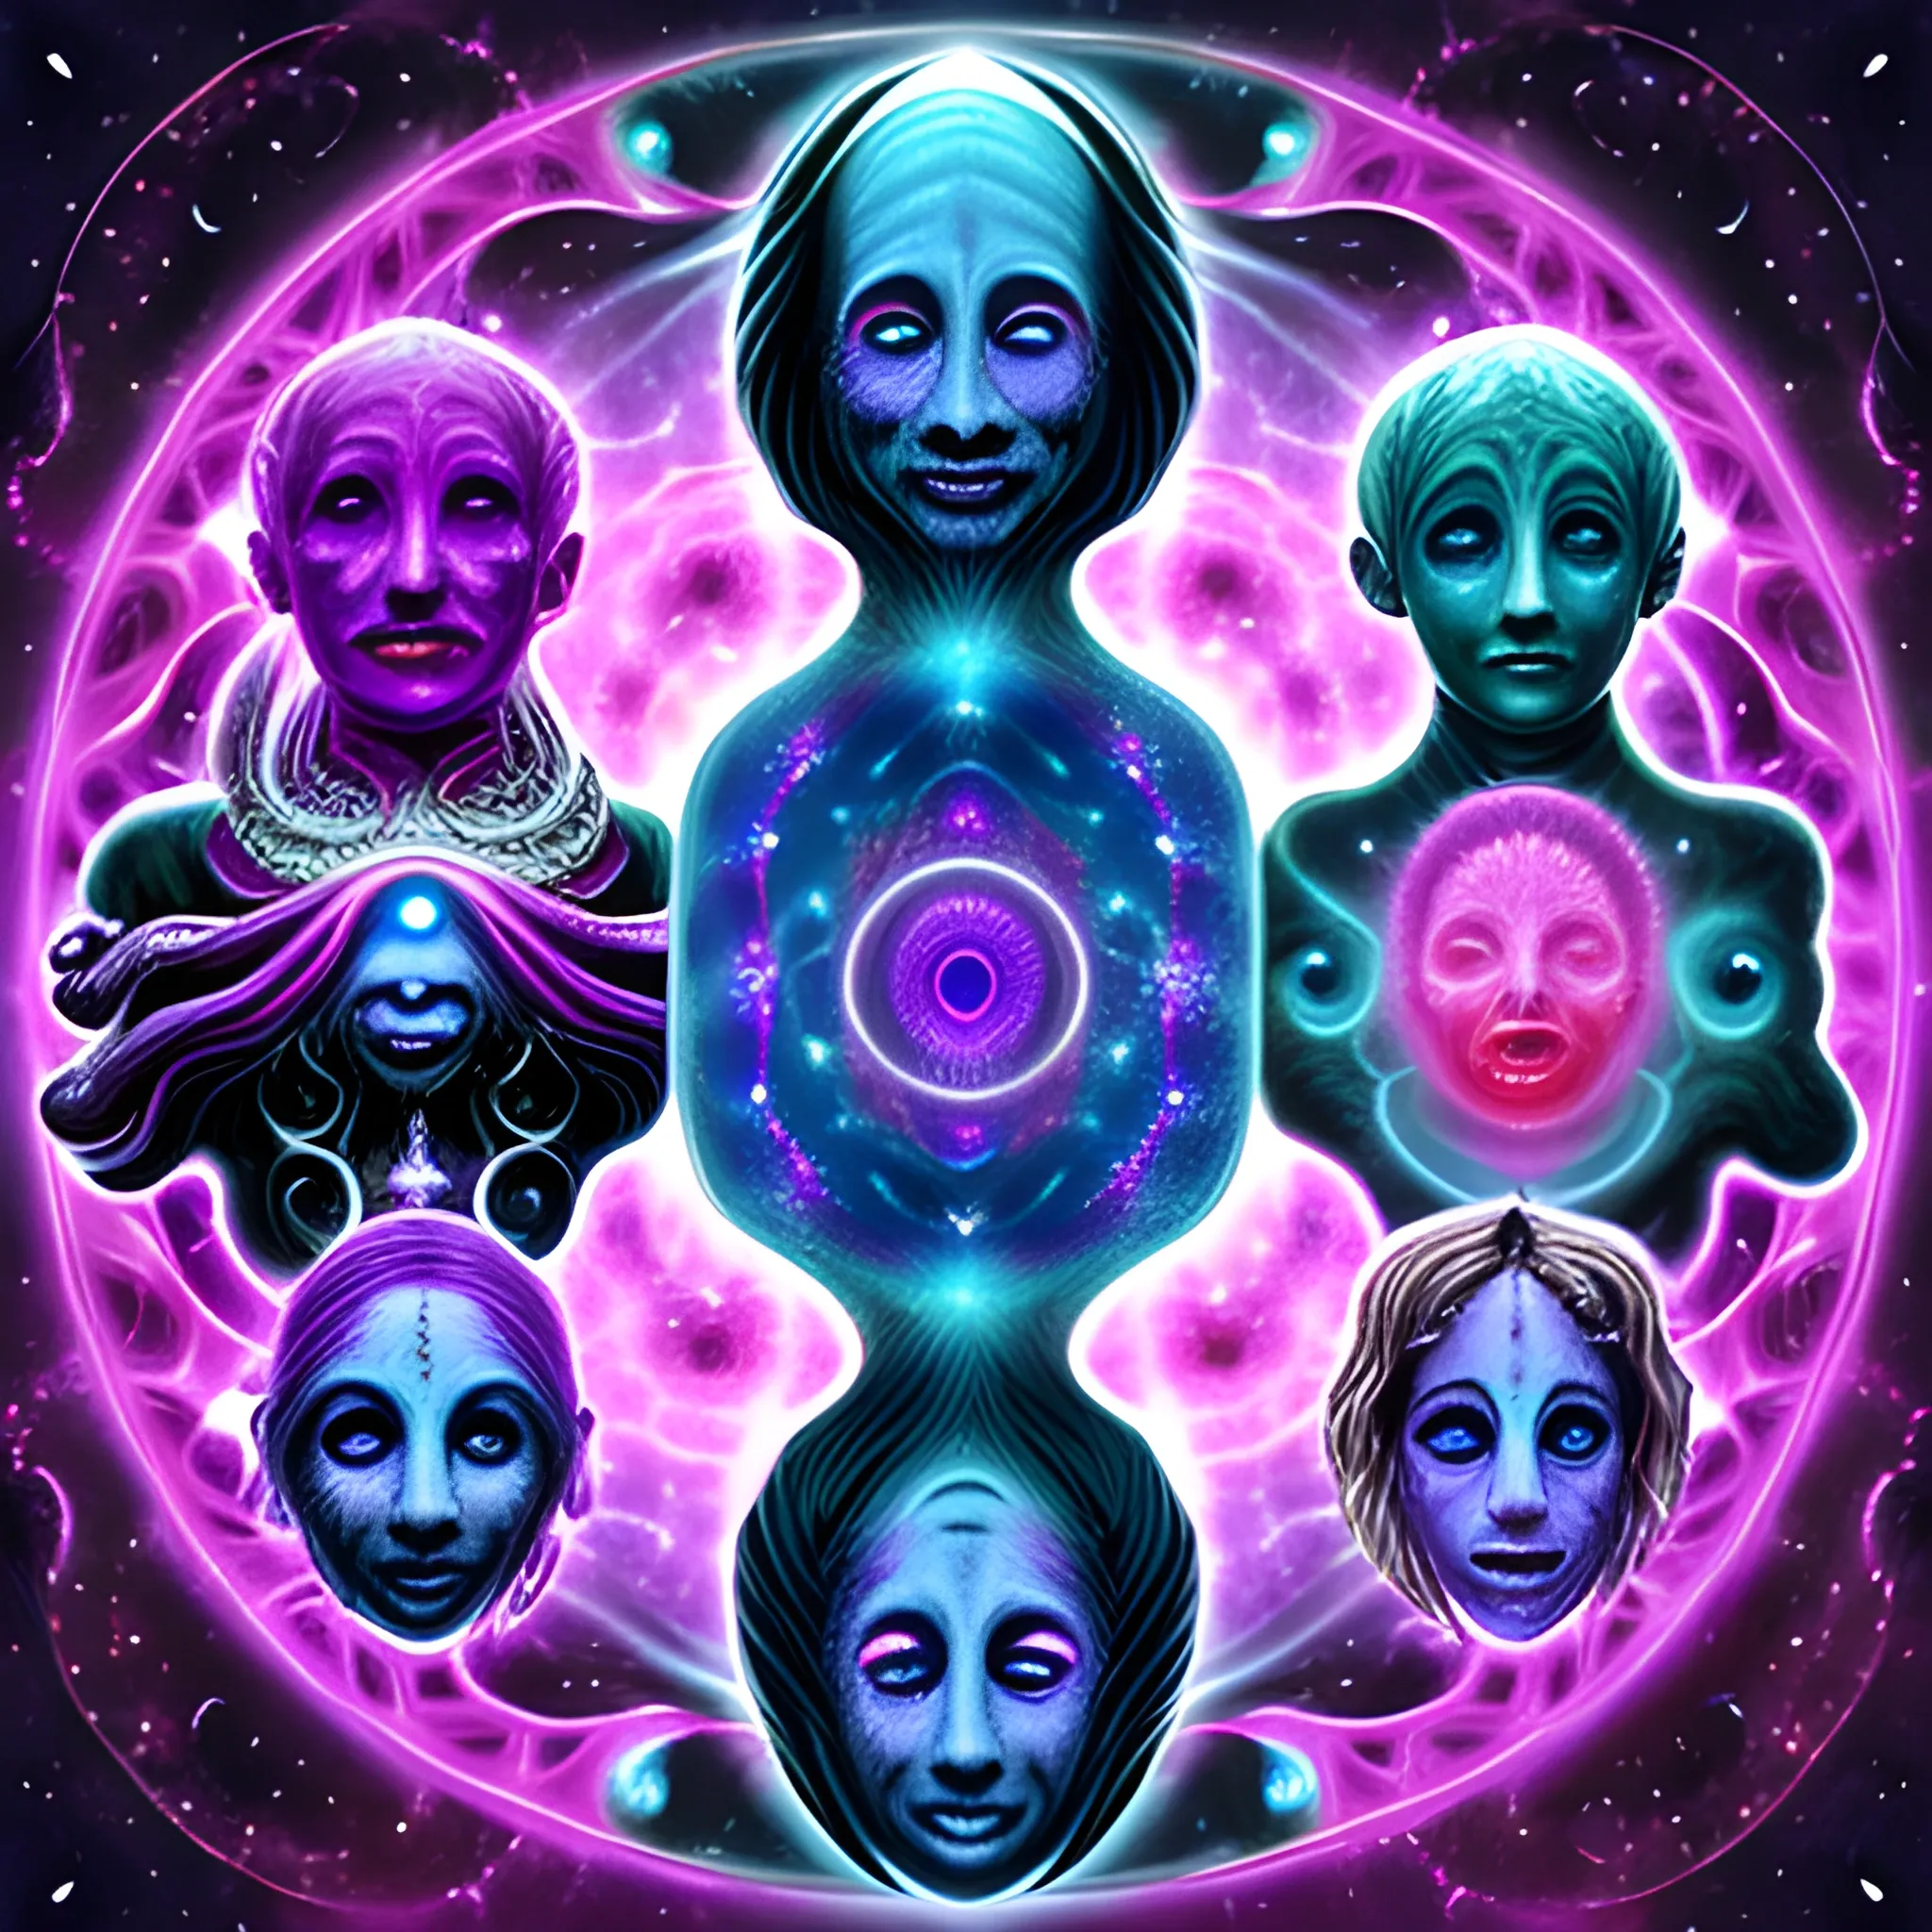 Entities of the astral universe